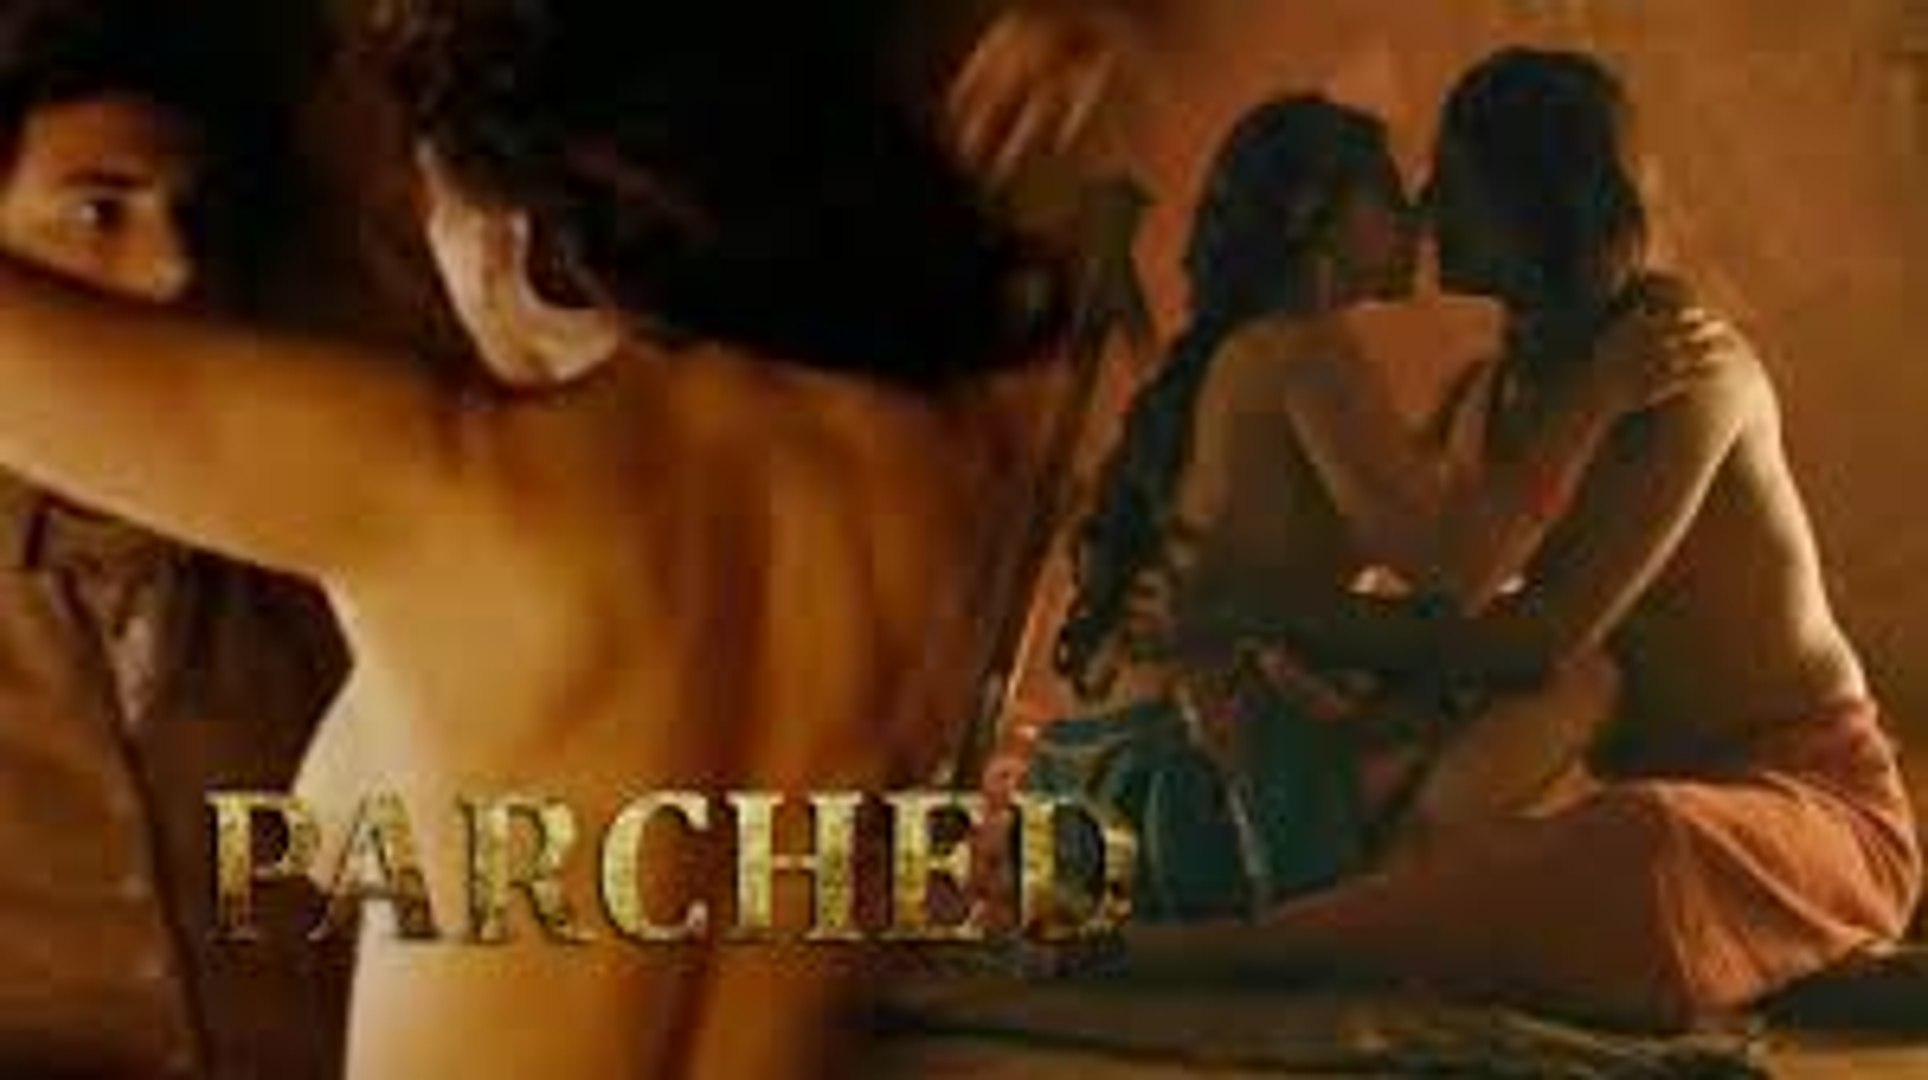 Parched - UNRATED - Dvd Part-1